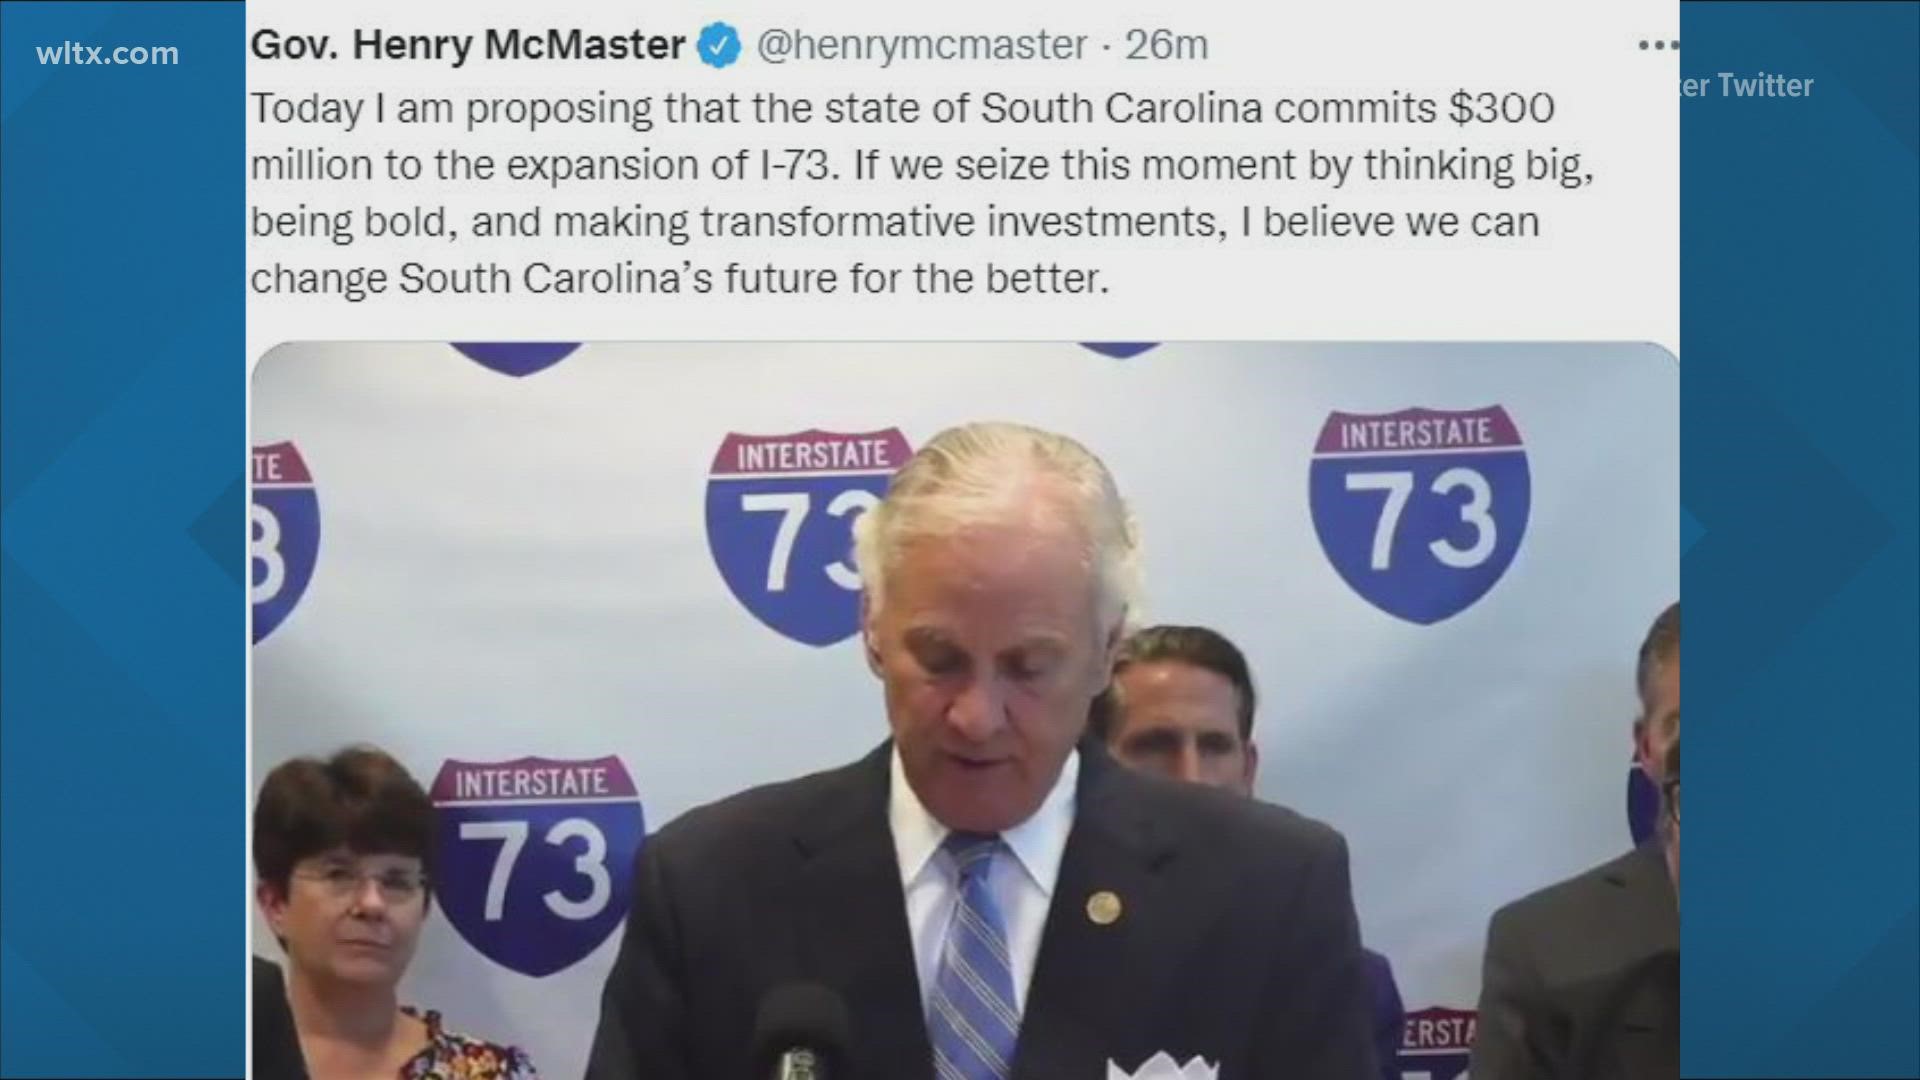 The governor wants to spend $300M to expand I-73 into South Carolina, currently it ends in N.C.